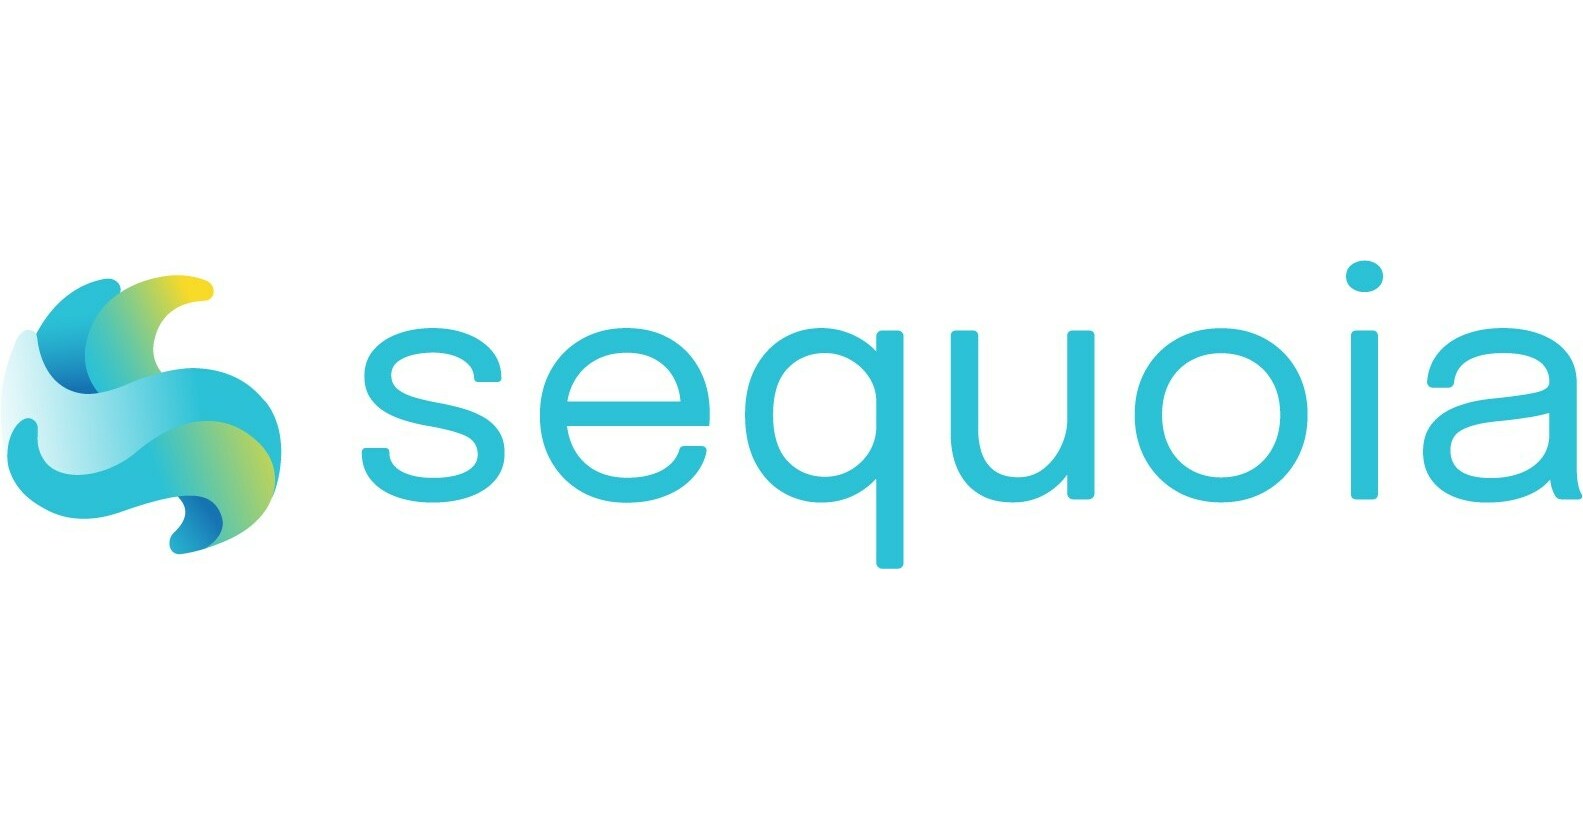 Sequoia Group Solutions